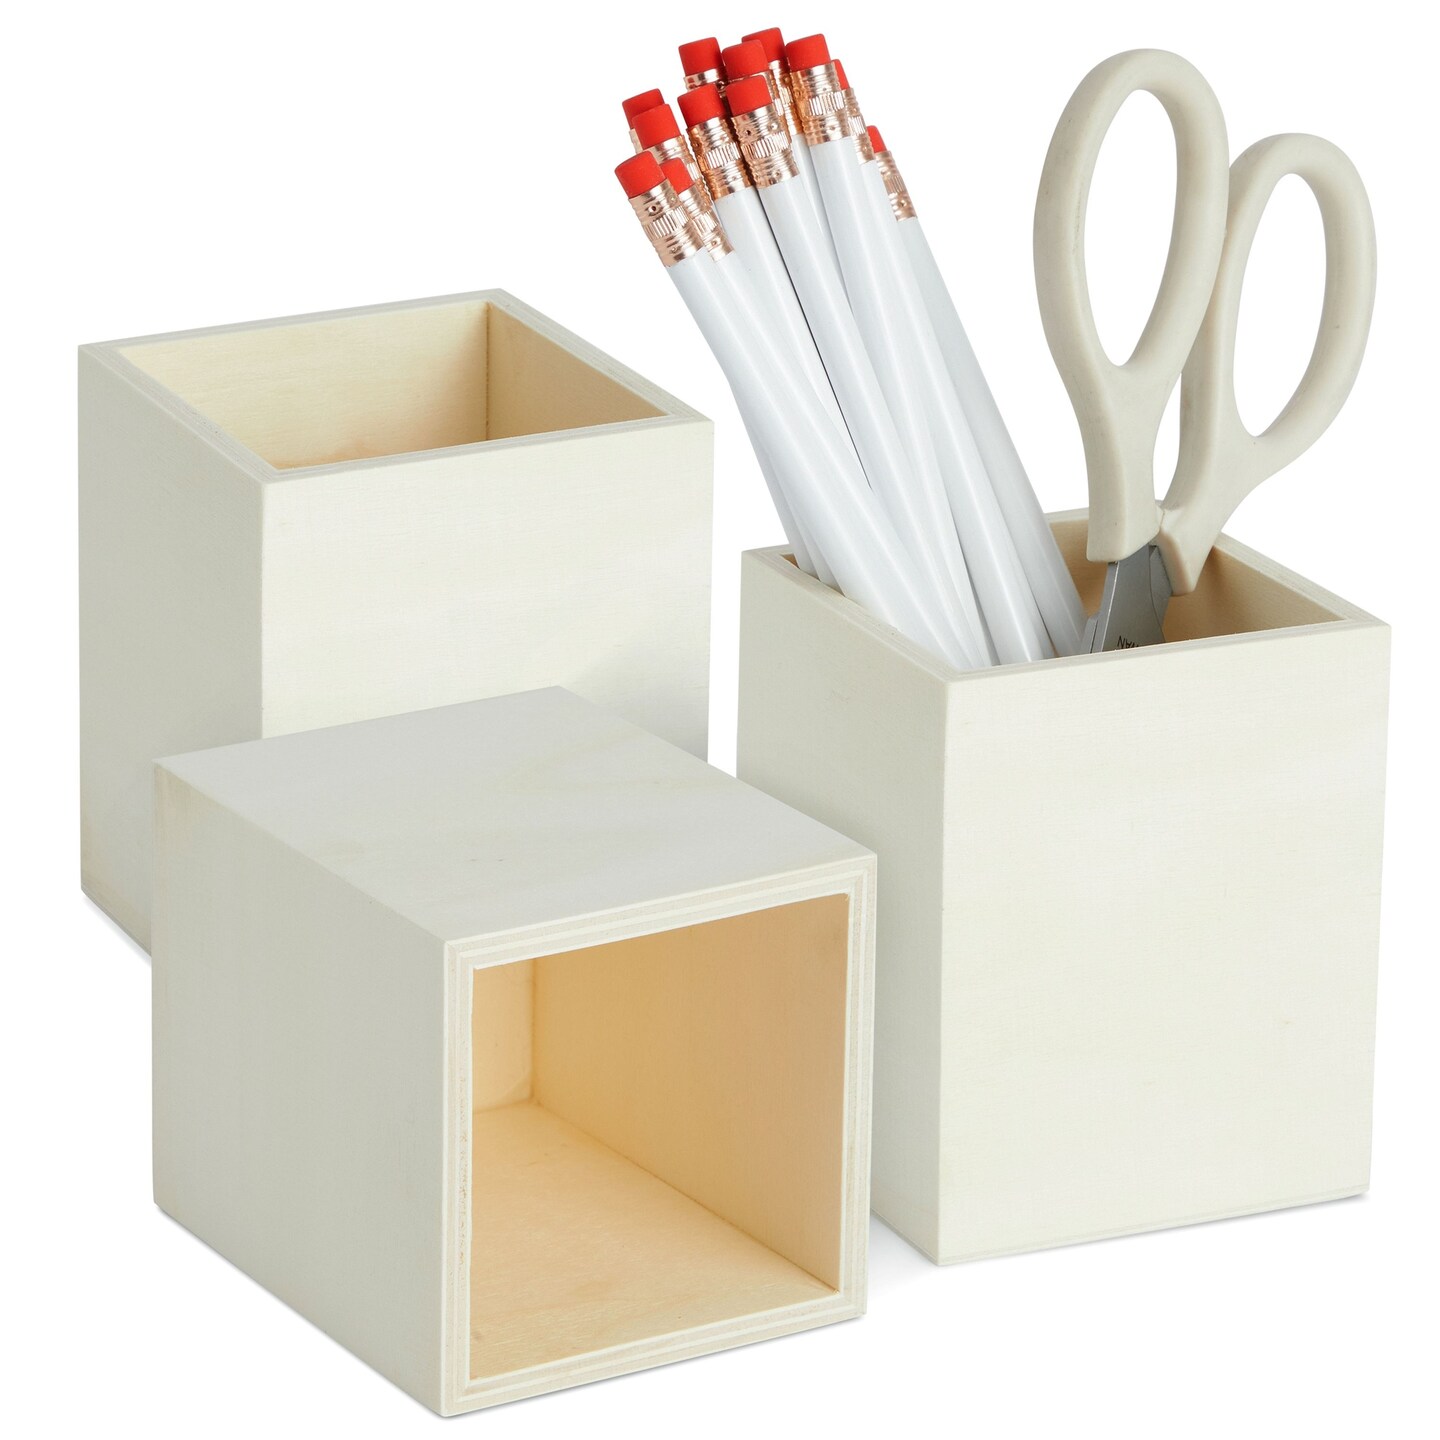 3 Pack Unfinished Wood Pencil Holder Cups for Office - Pen Accessories Organizer and Storage for Classroom Desk (3 in)